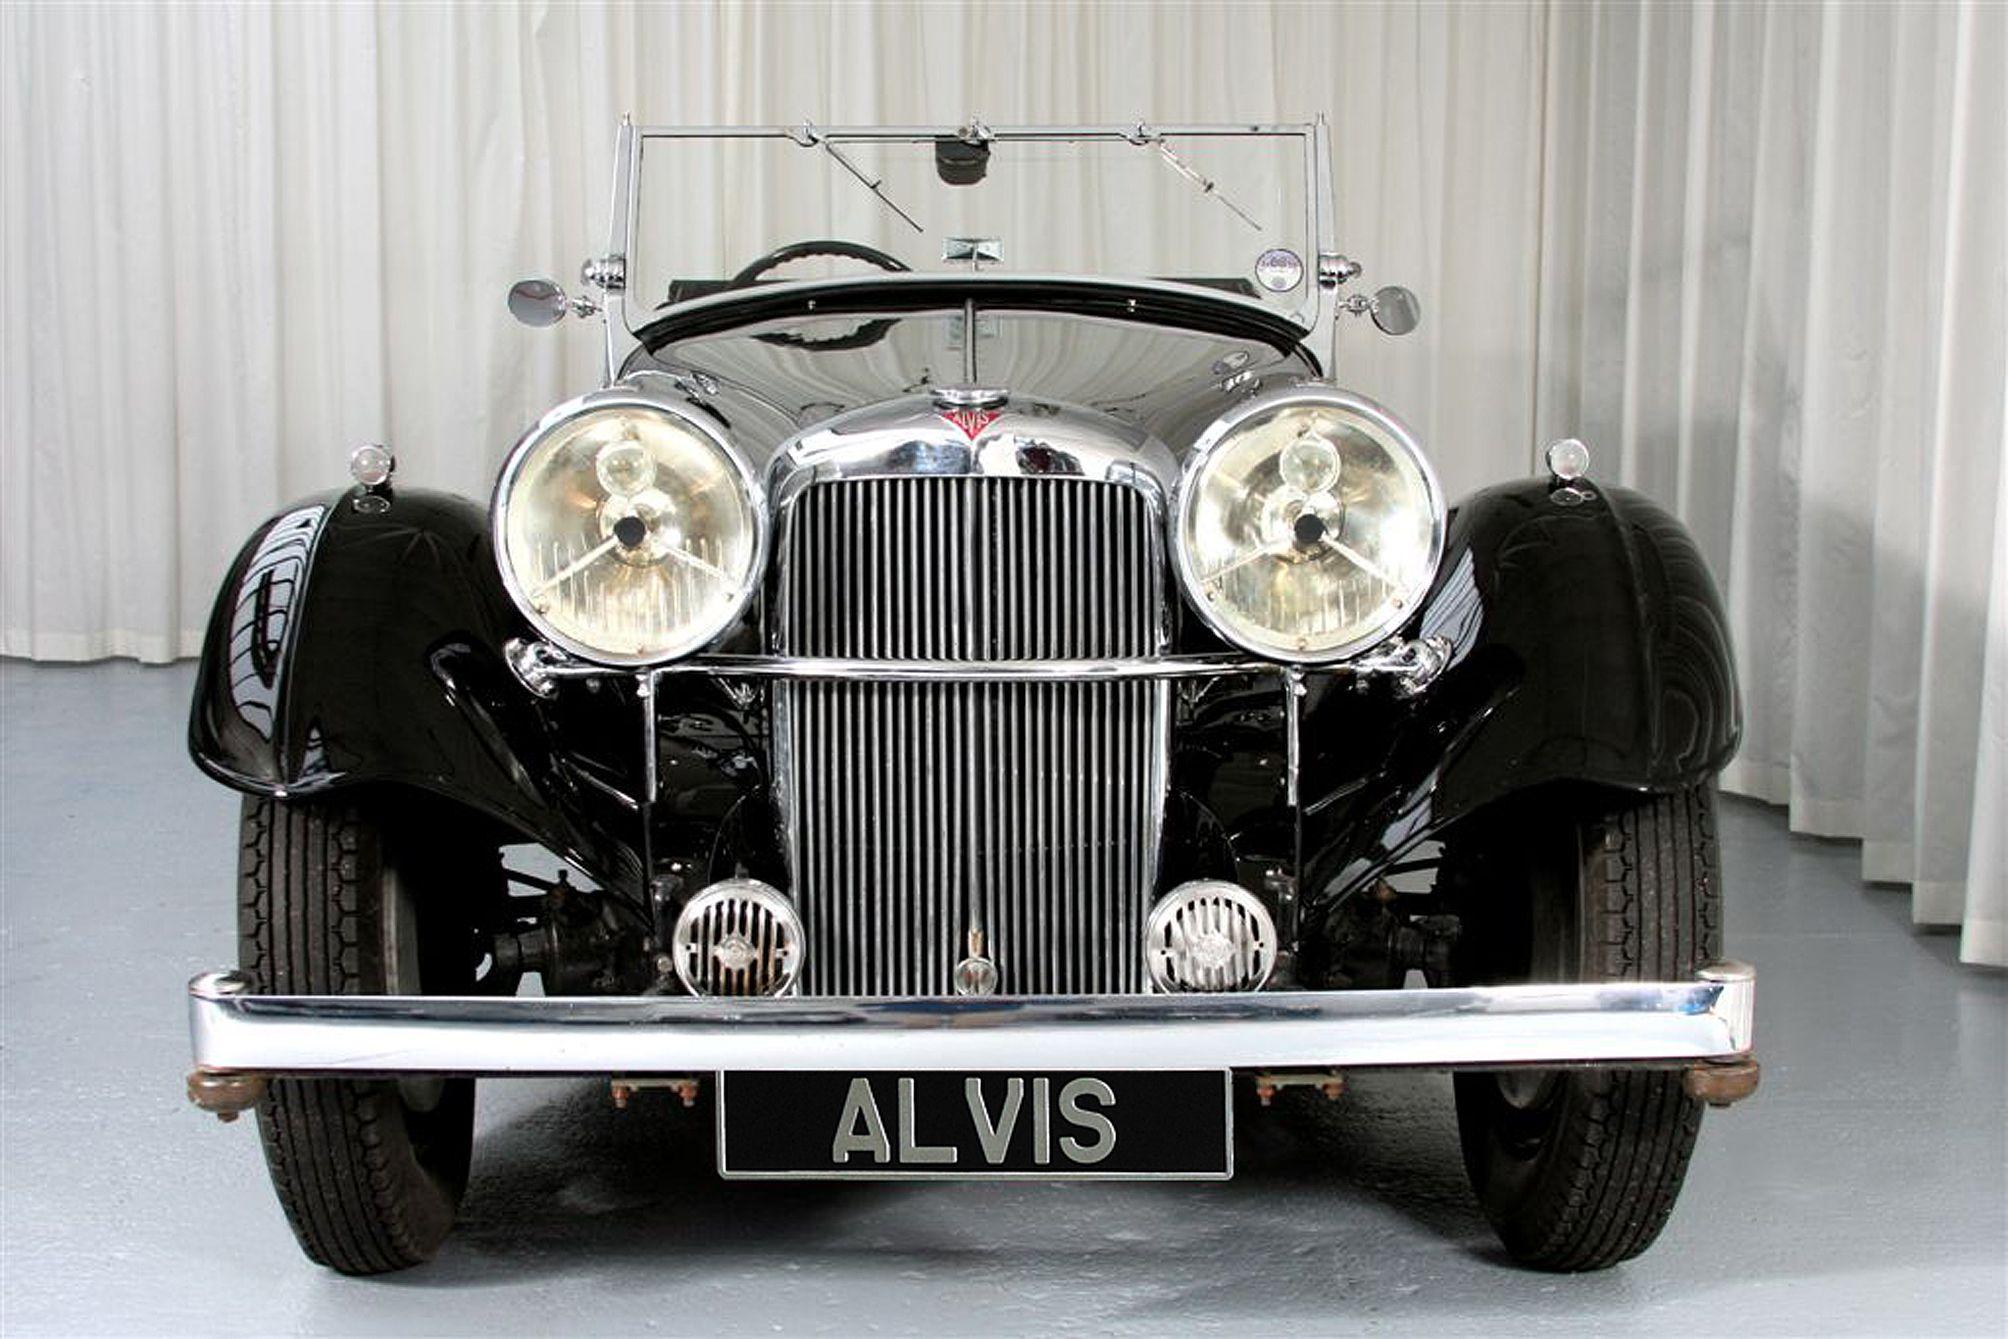 Silver Car with Red Triangle Logo - 1939sp25c Triangle Parts, Restoration and Car Sales